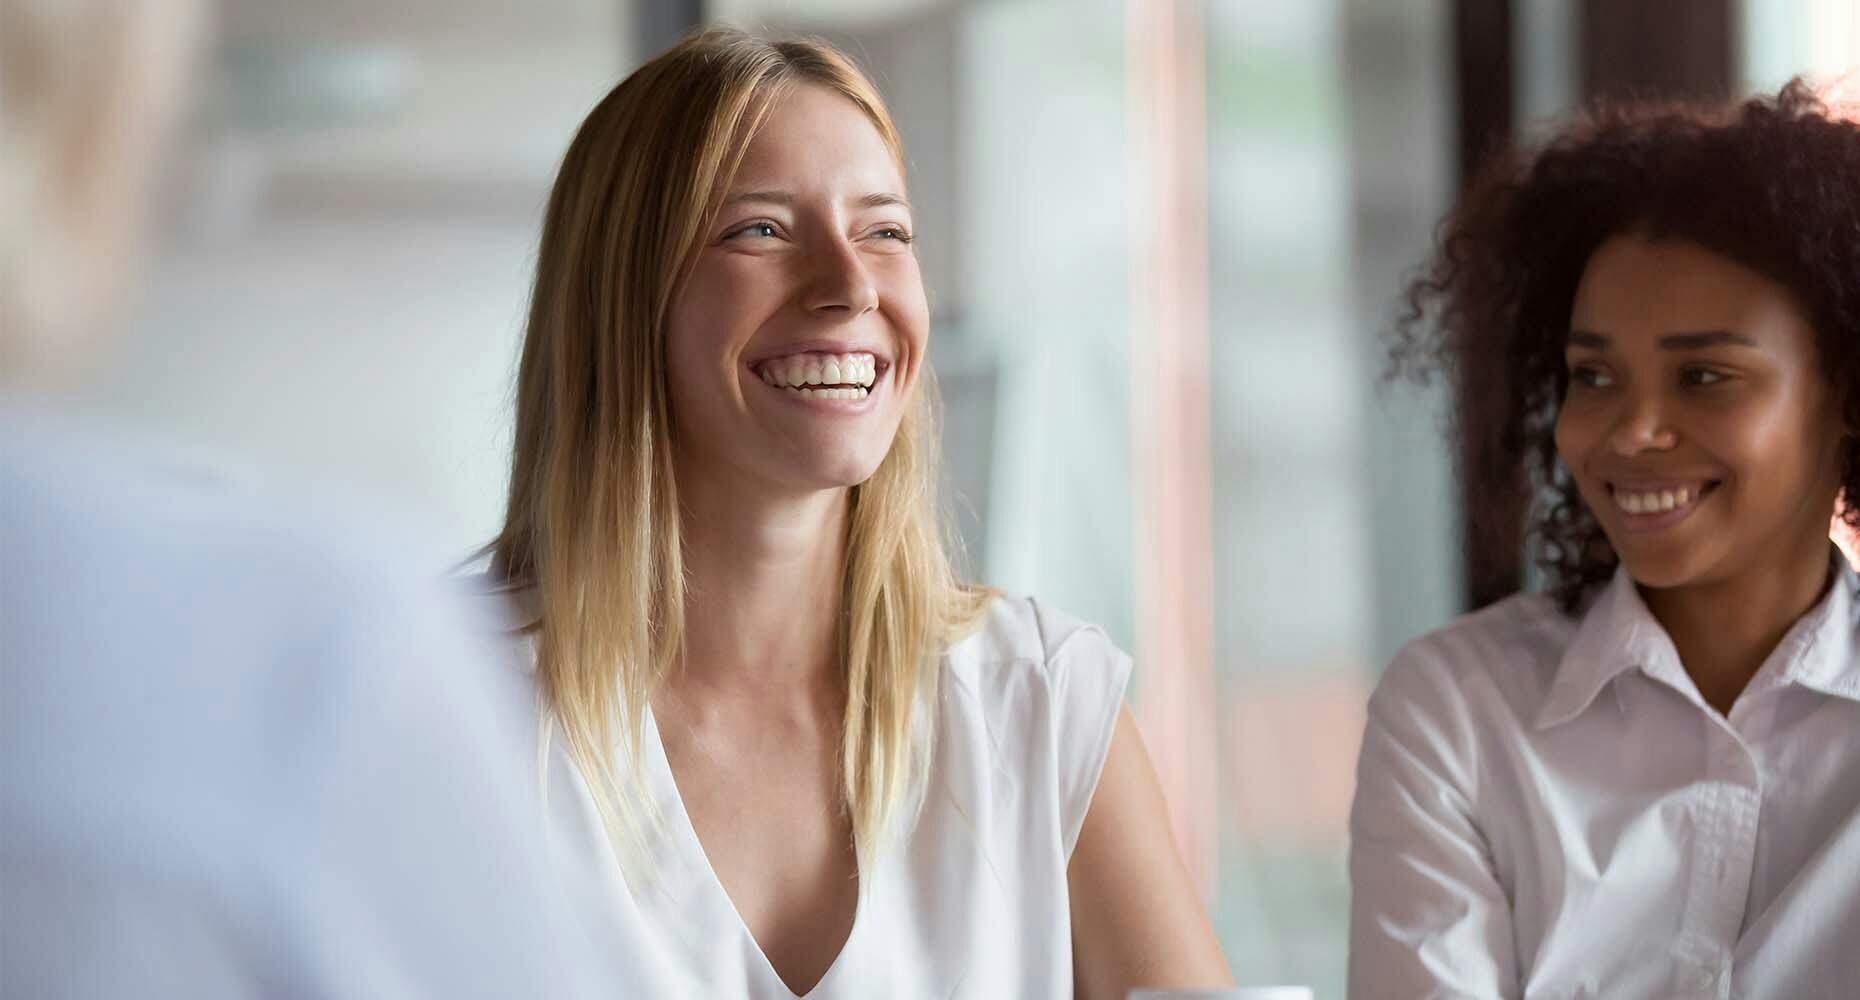 Two women smiling during a meeting